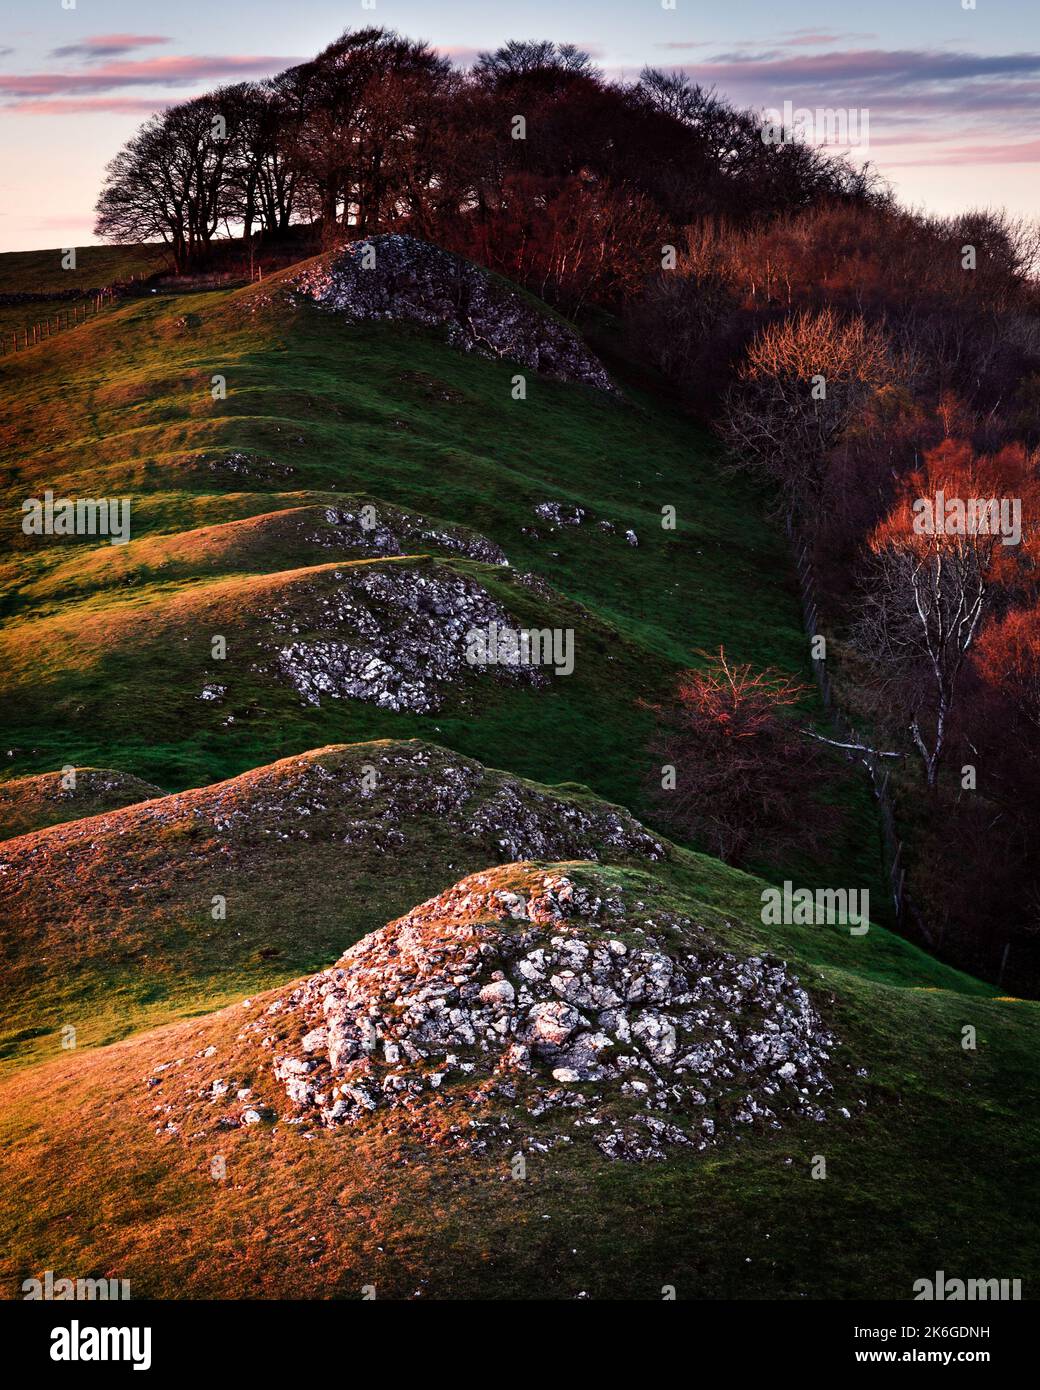 A sunset light on the colorful Bunster Hill, Dovedale in the Peak District national park, UK Stock Photo